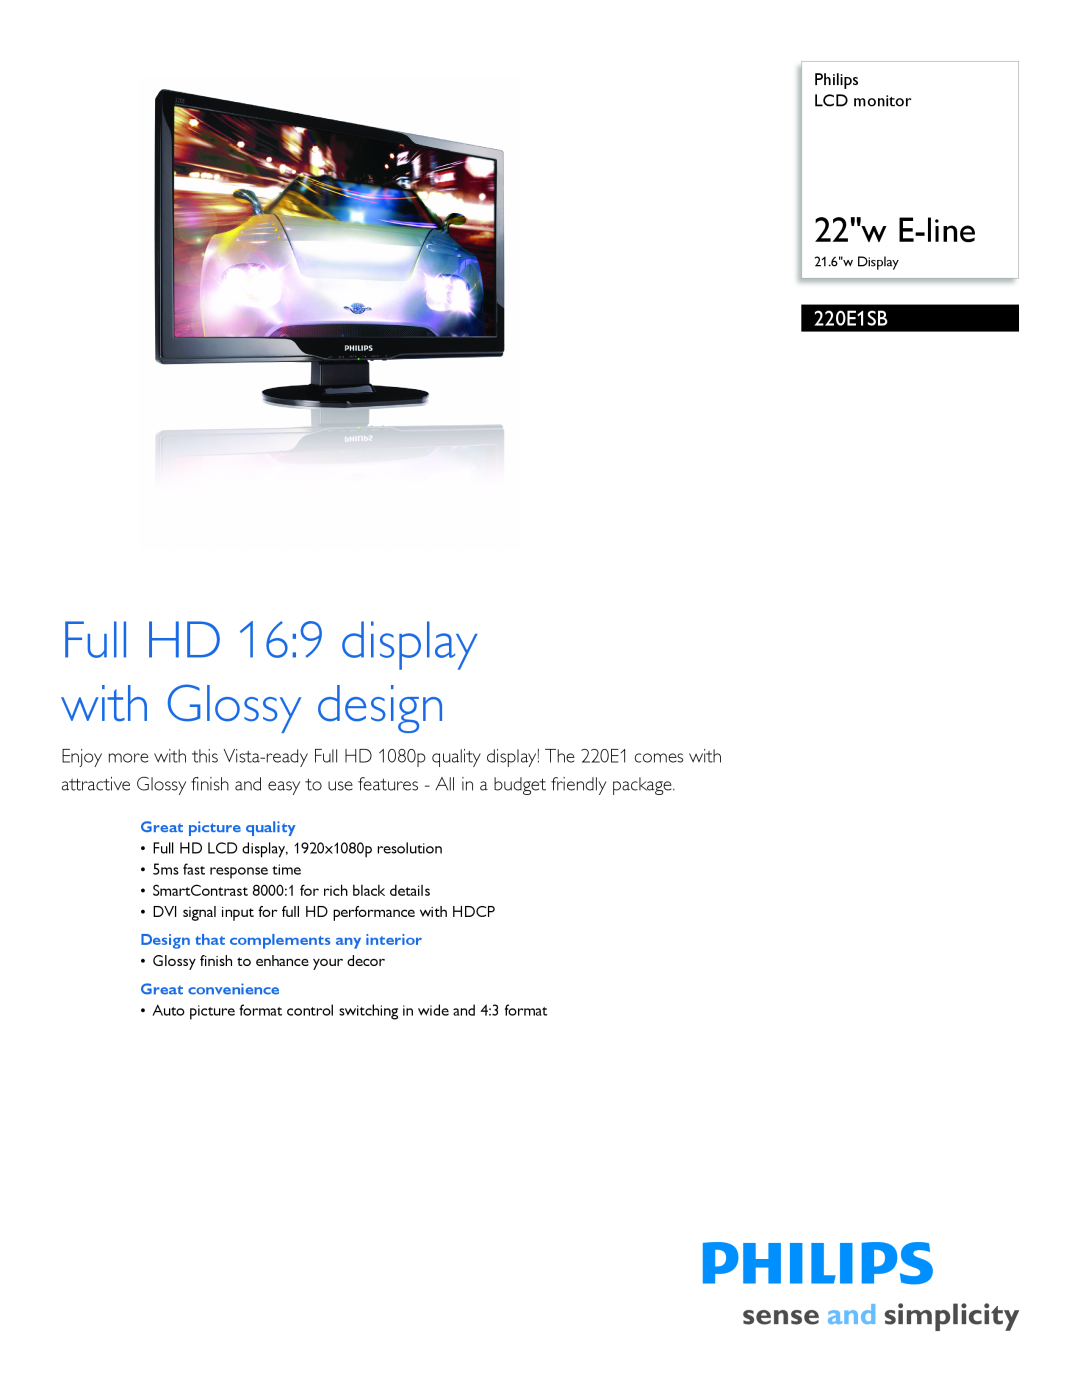 Philips 220E1SB/27 manual Philips LCD monitor, Full HD 16 9 display with Glossy design, 22w E-line 